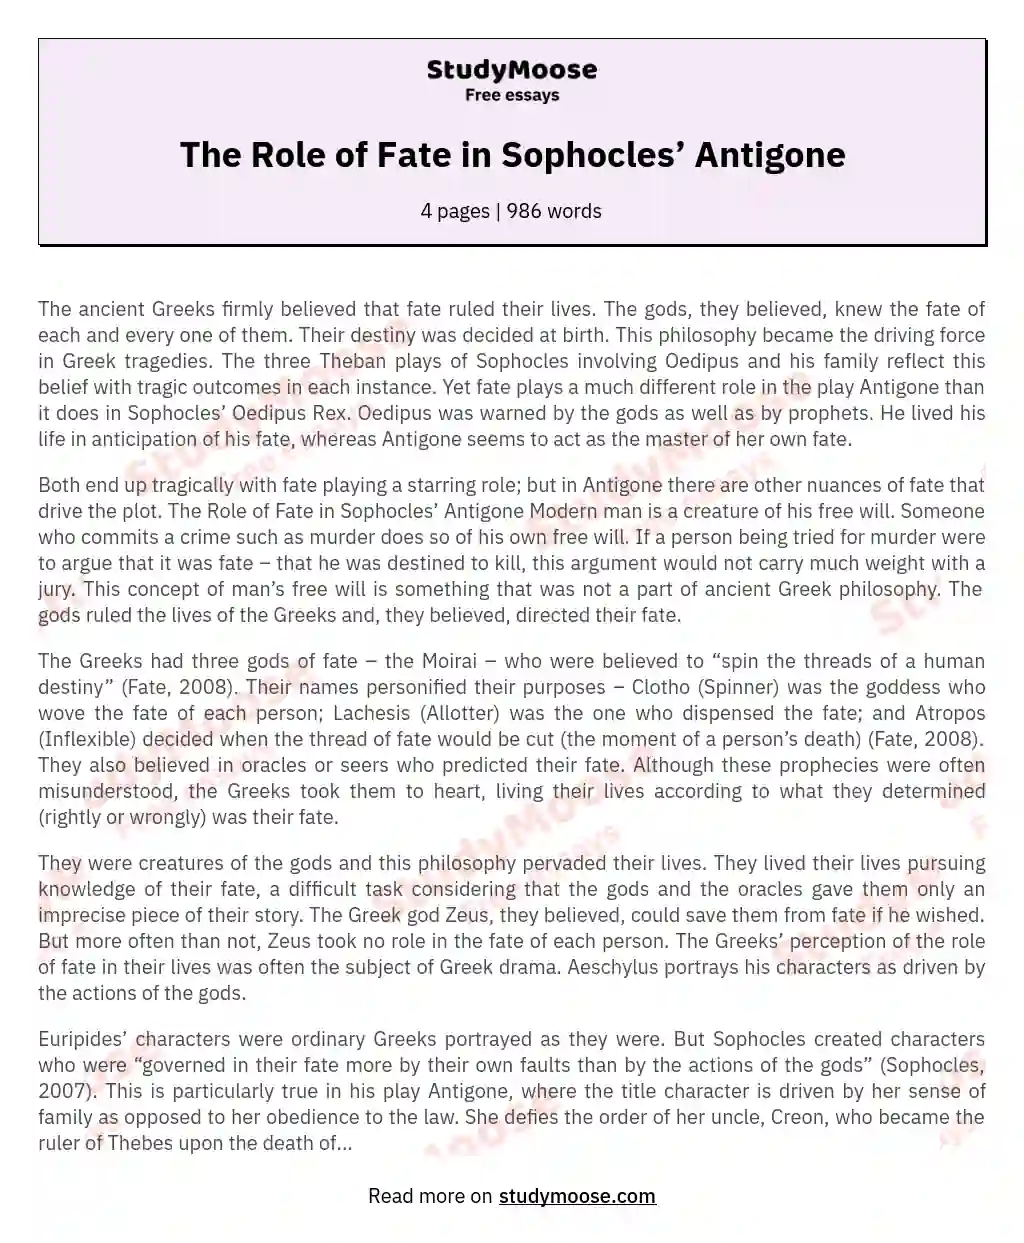 The Role of Fate in Sophocles’ Antigone essay